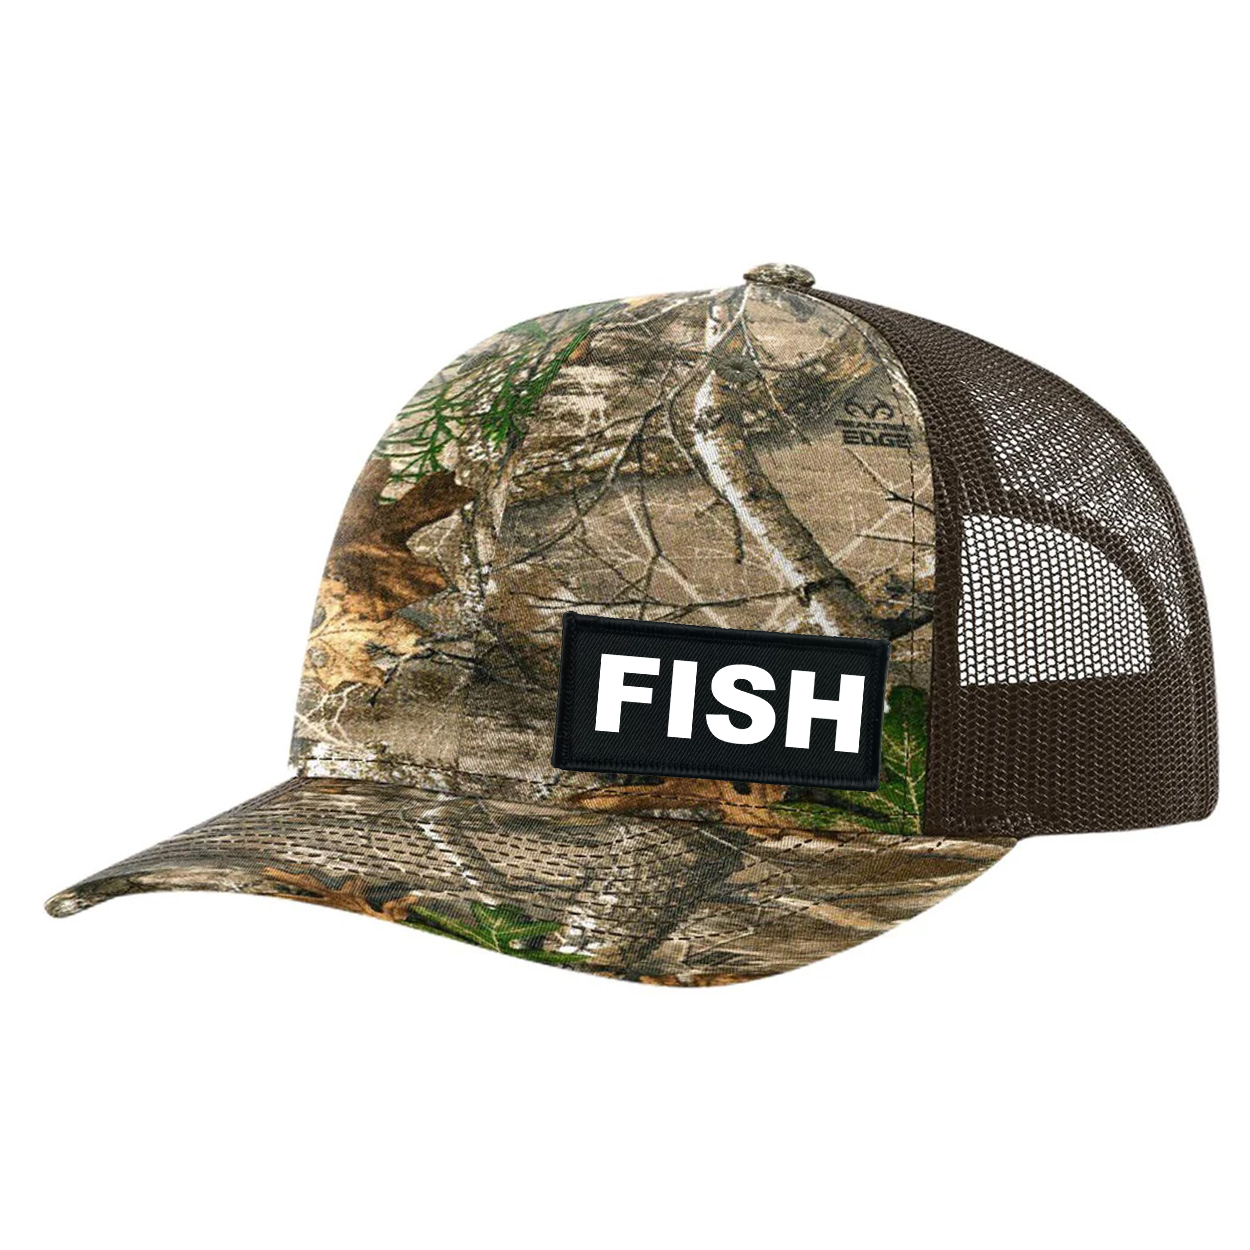 Fish Brand Logo Night Out Woven Patch Snapback Trucker Hat Realtree Edge/ Brown